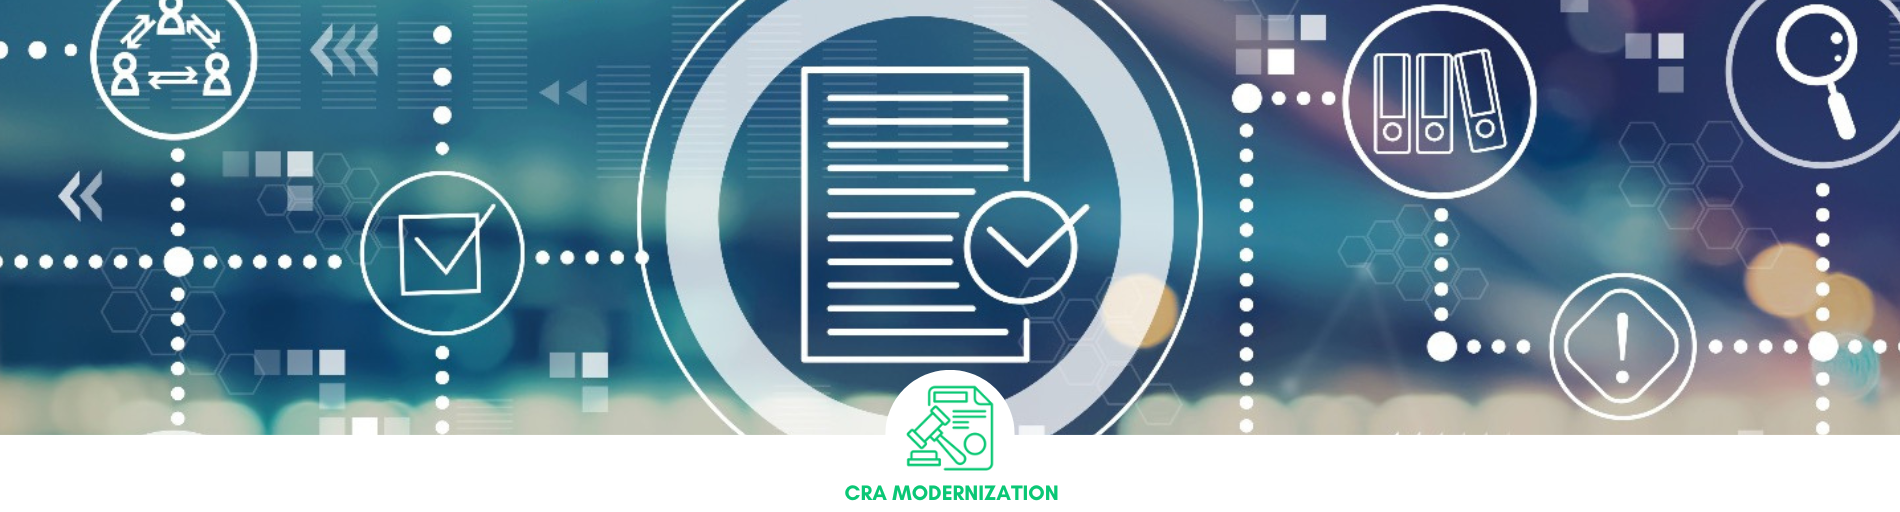 CRA Checkpoint: Where We Are on the Journey to CRA Modernization